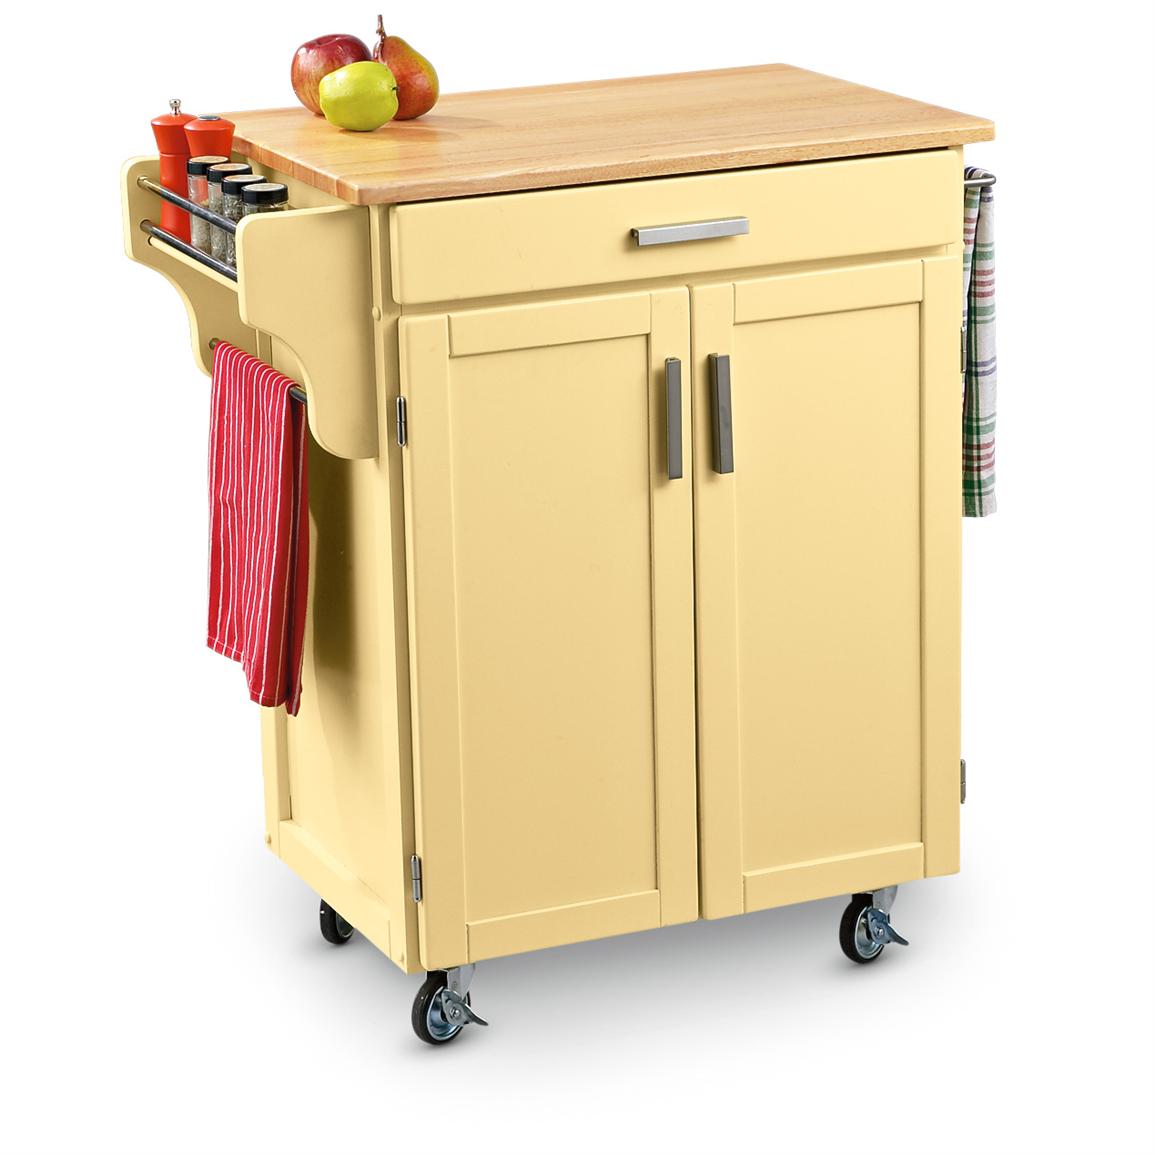 Rolling Wood - top Kitchen Cart - 151282, Kitchen & Dining at Sportsman